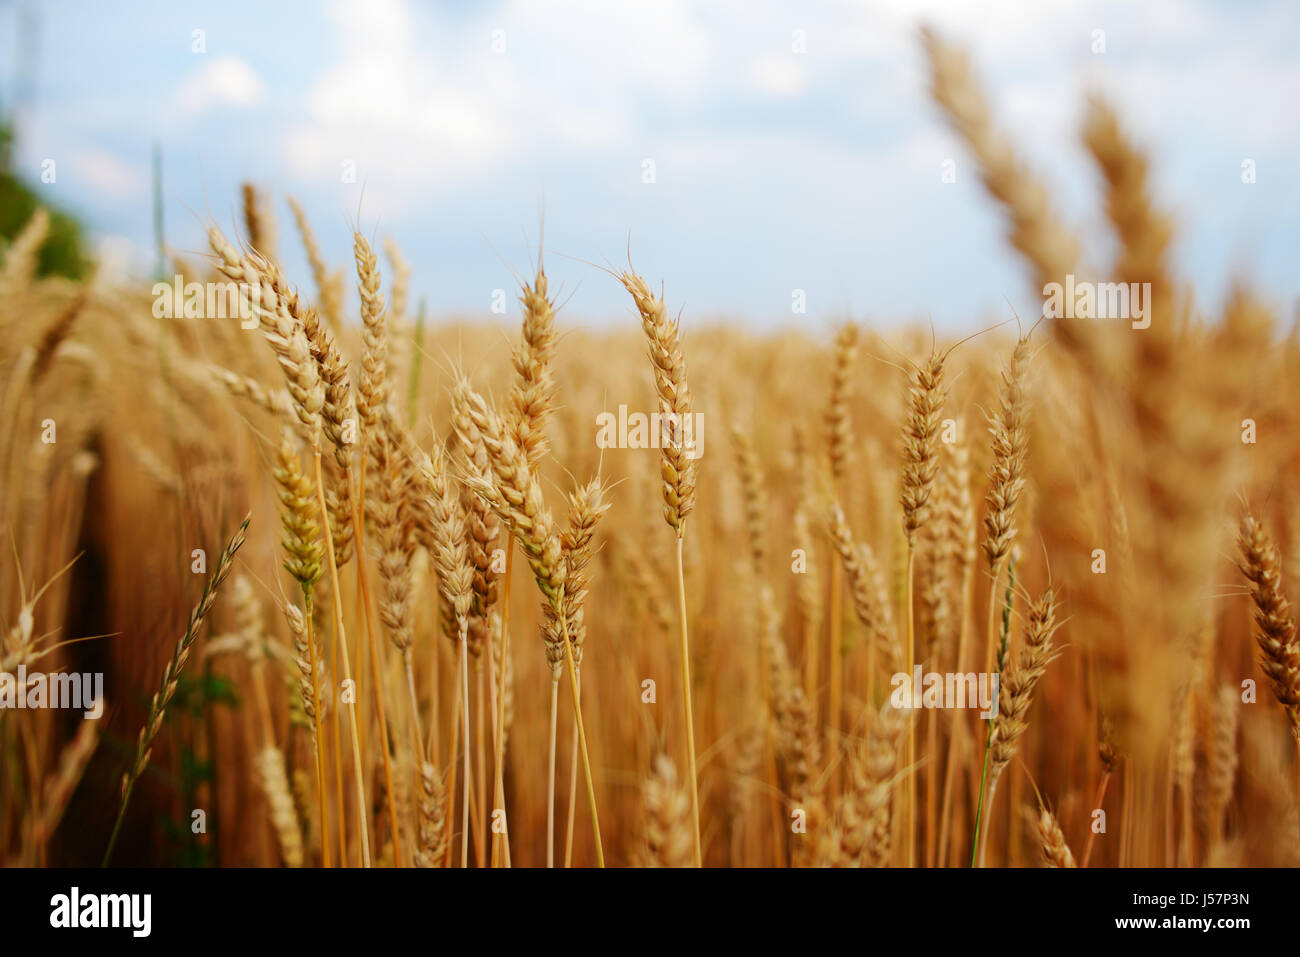 Wheat field. Ears of golden wheat close up. Stock Photo